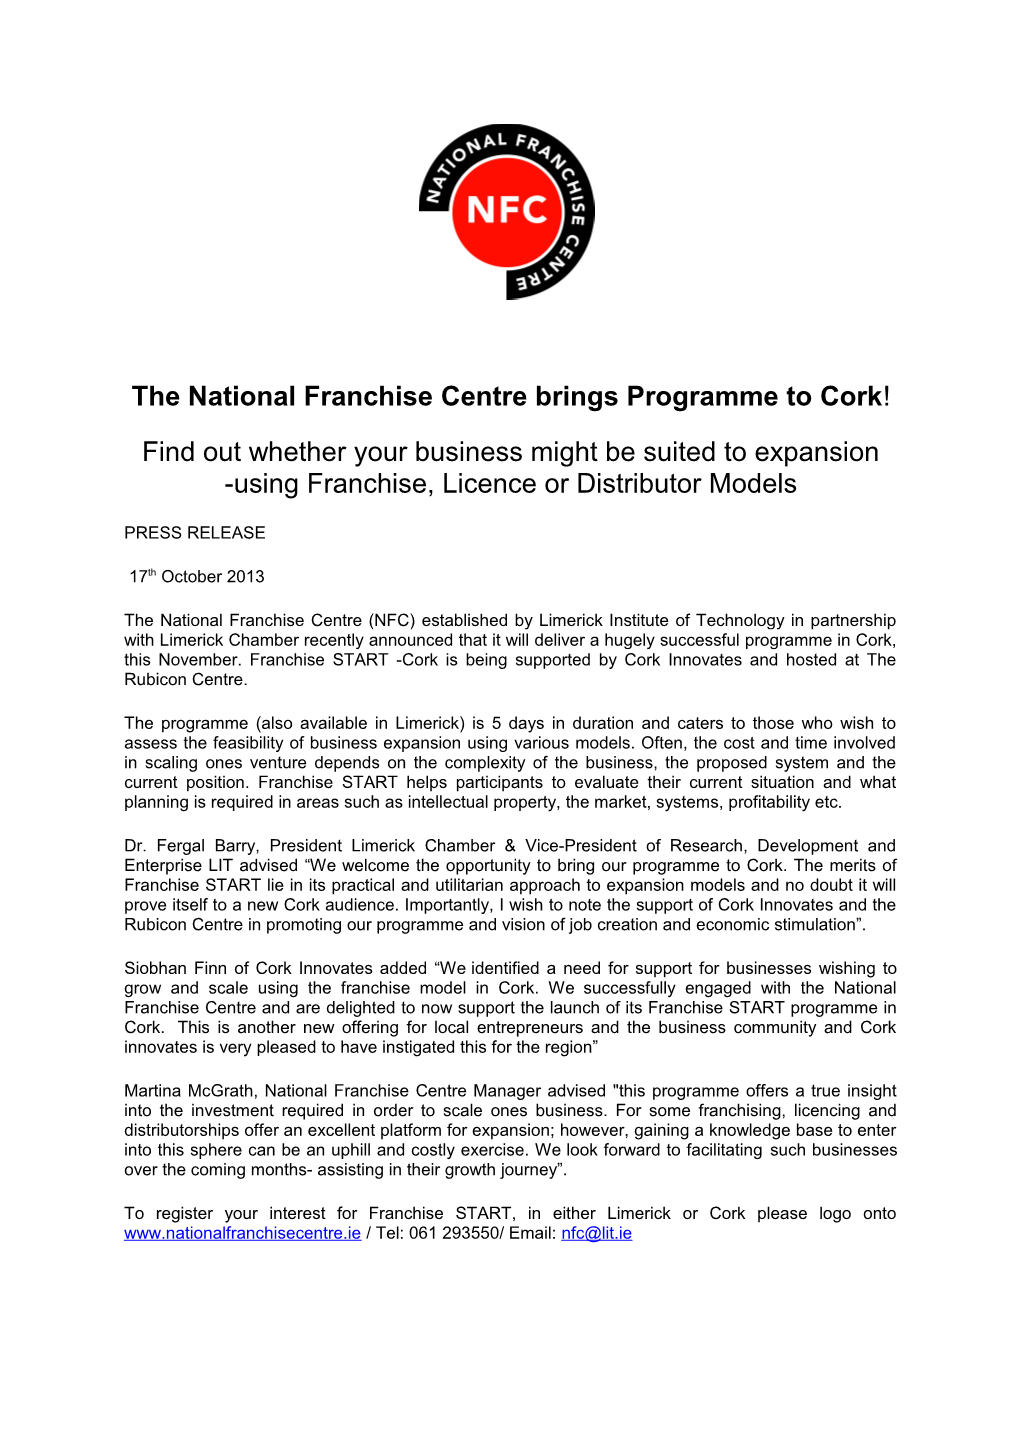 The National Franchise Centre Brings Programme to Cork !